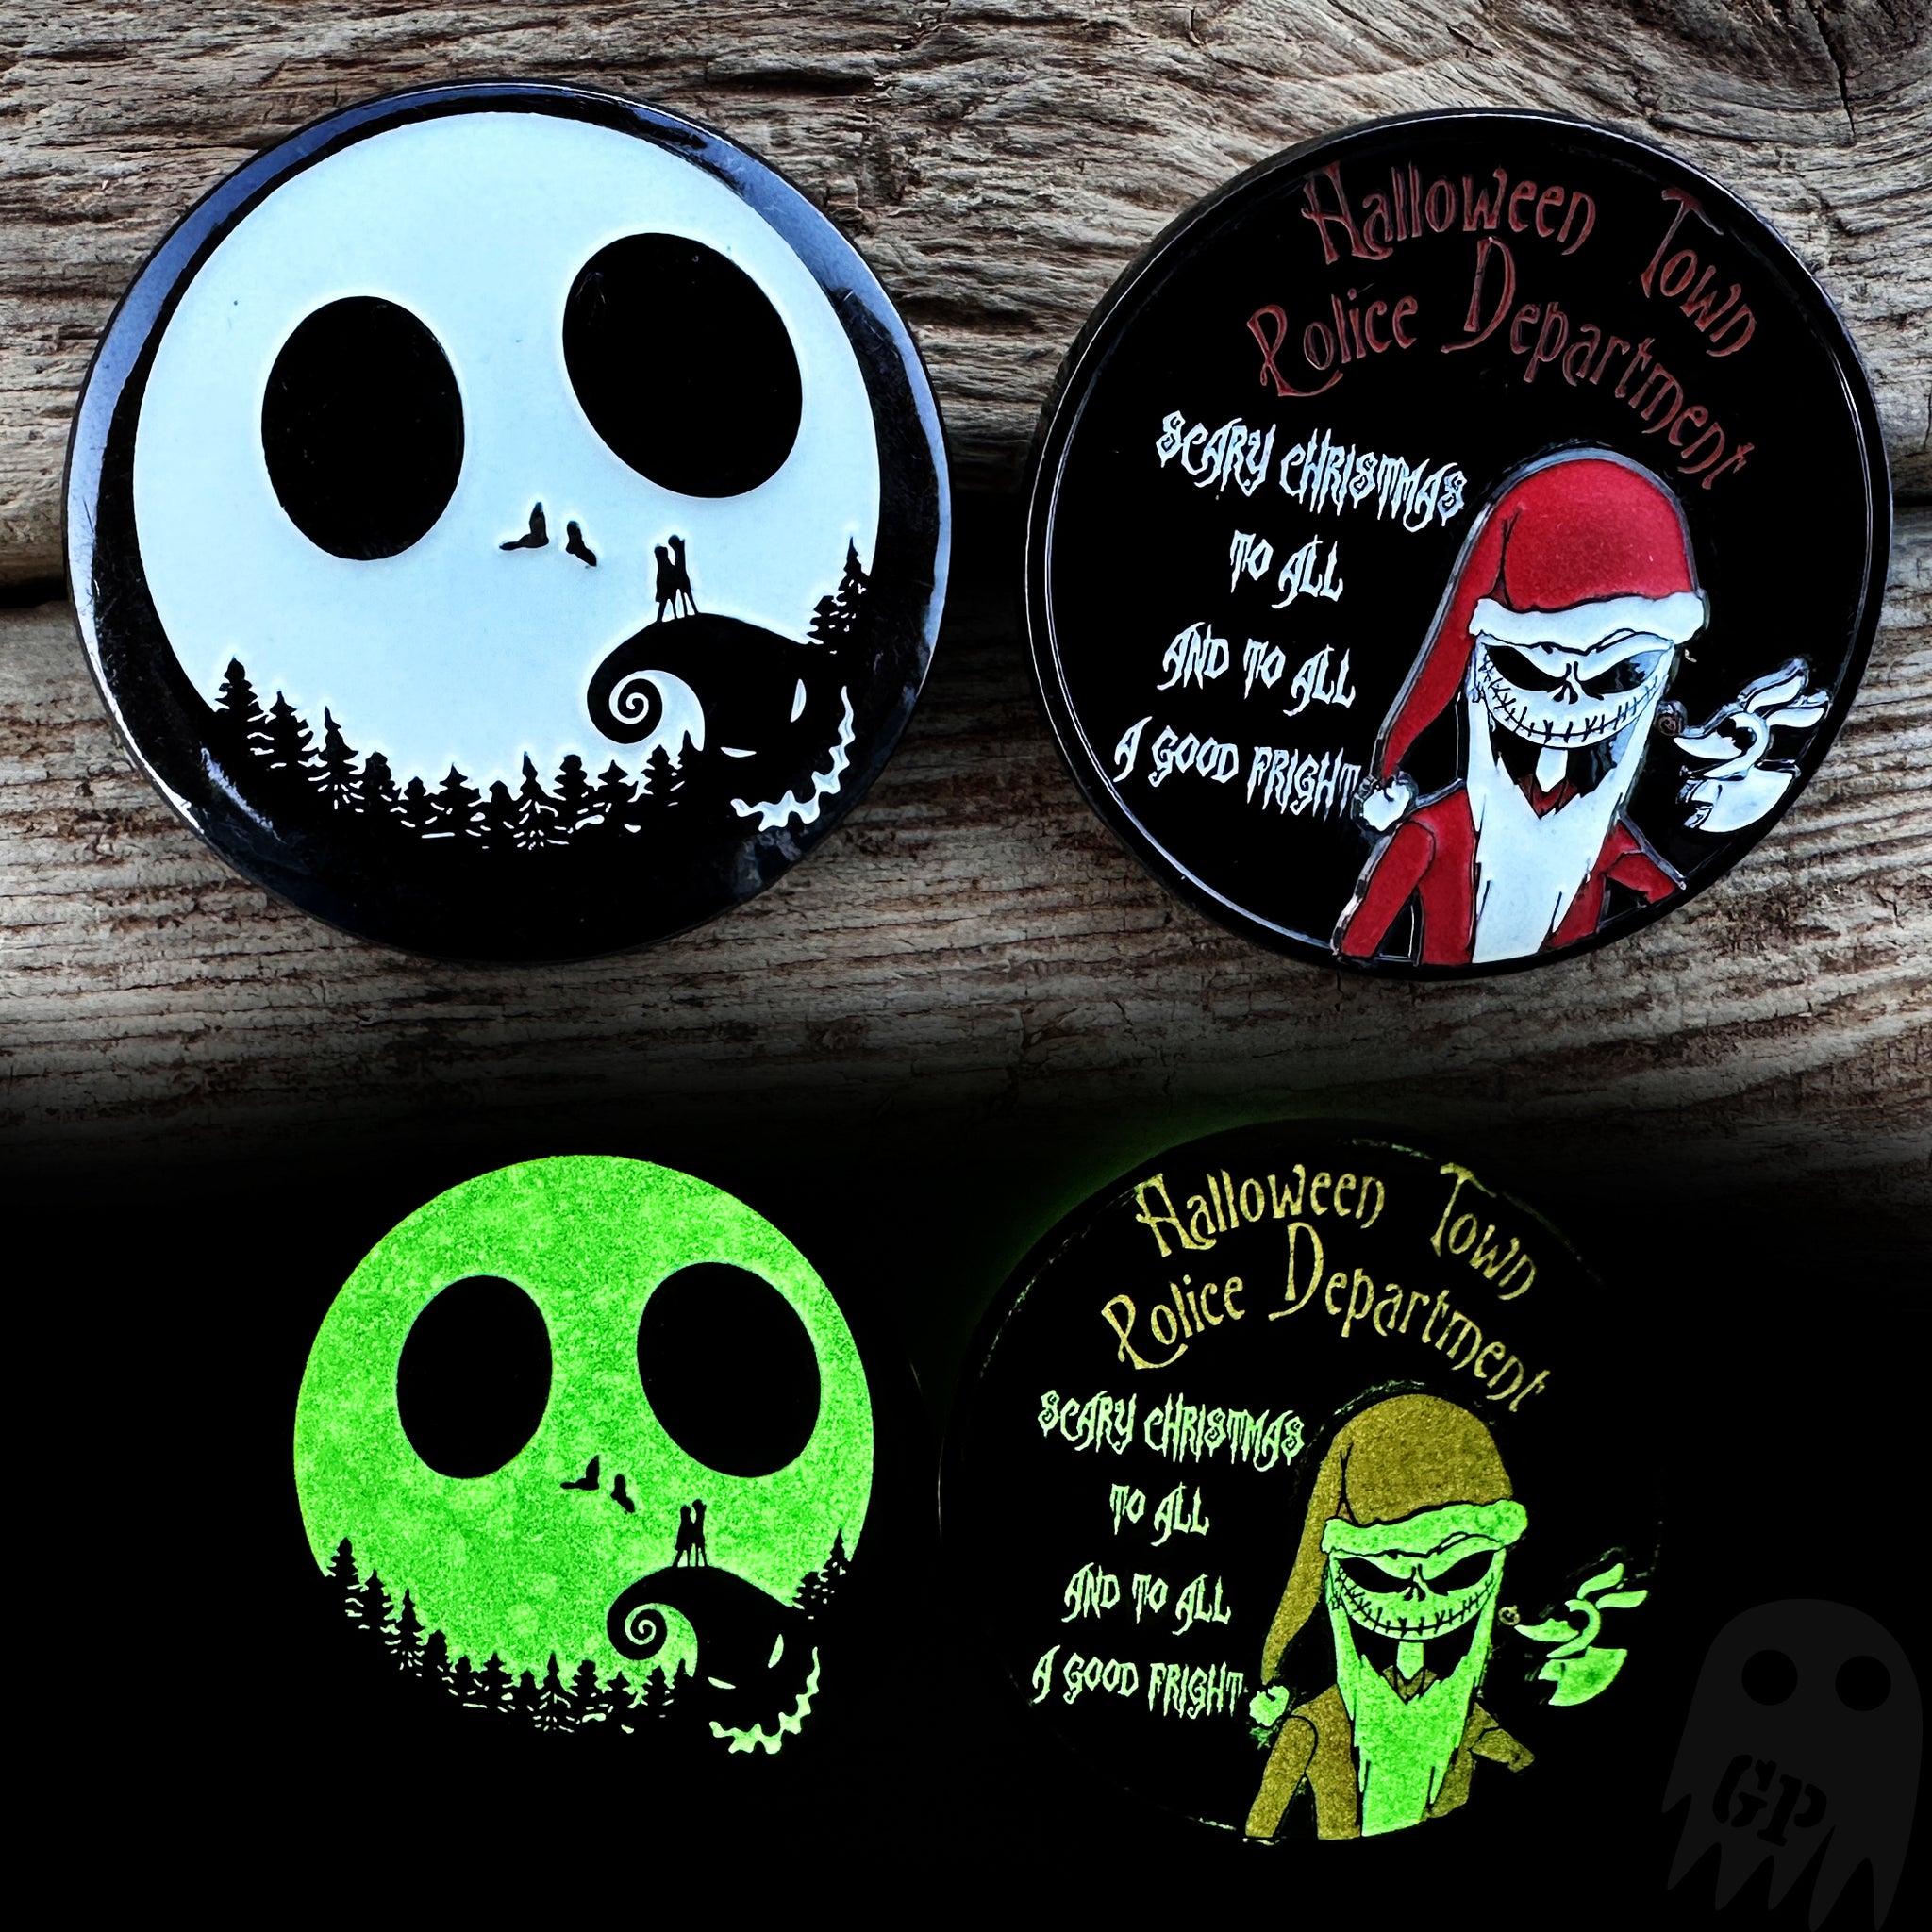 CHRISTMAS - Halloweentown PD Christmas Coin - Glow in the dark!